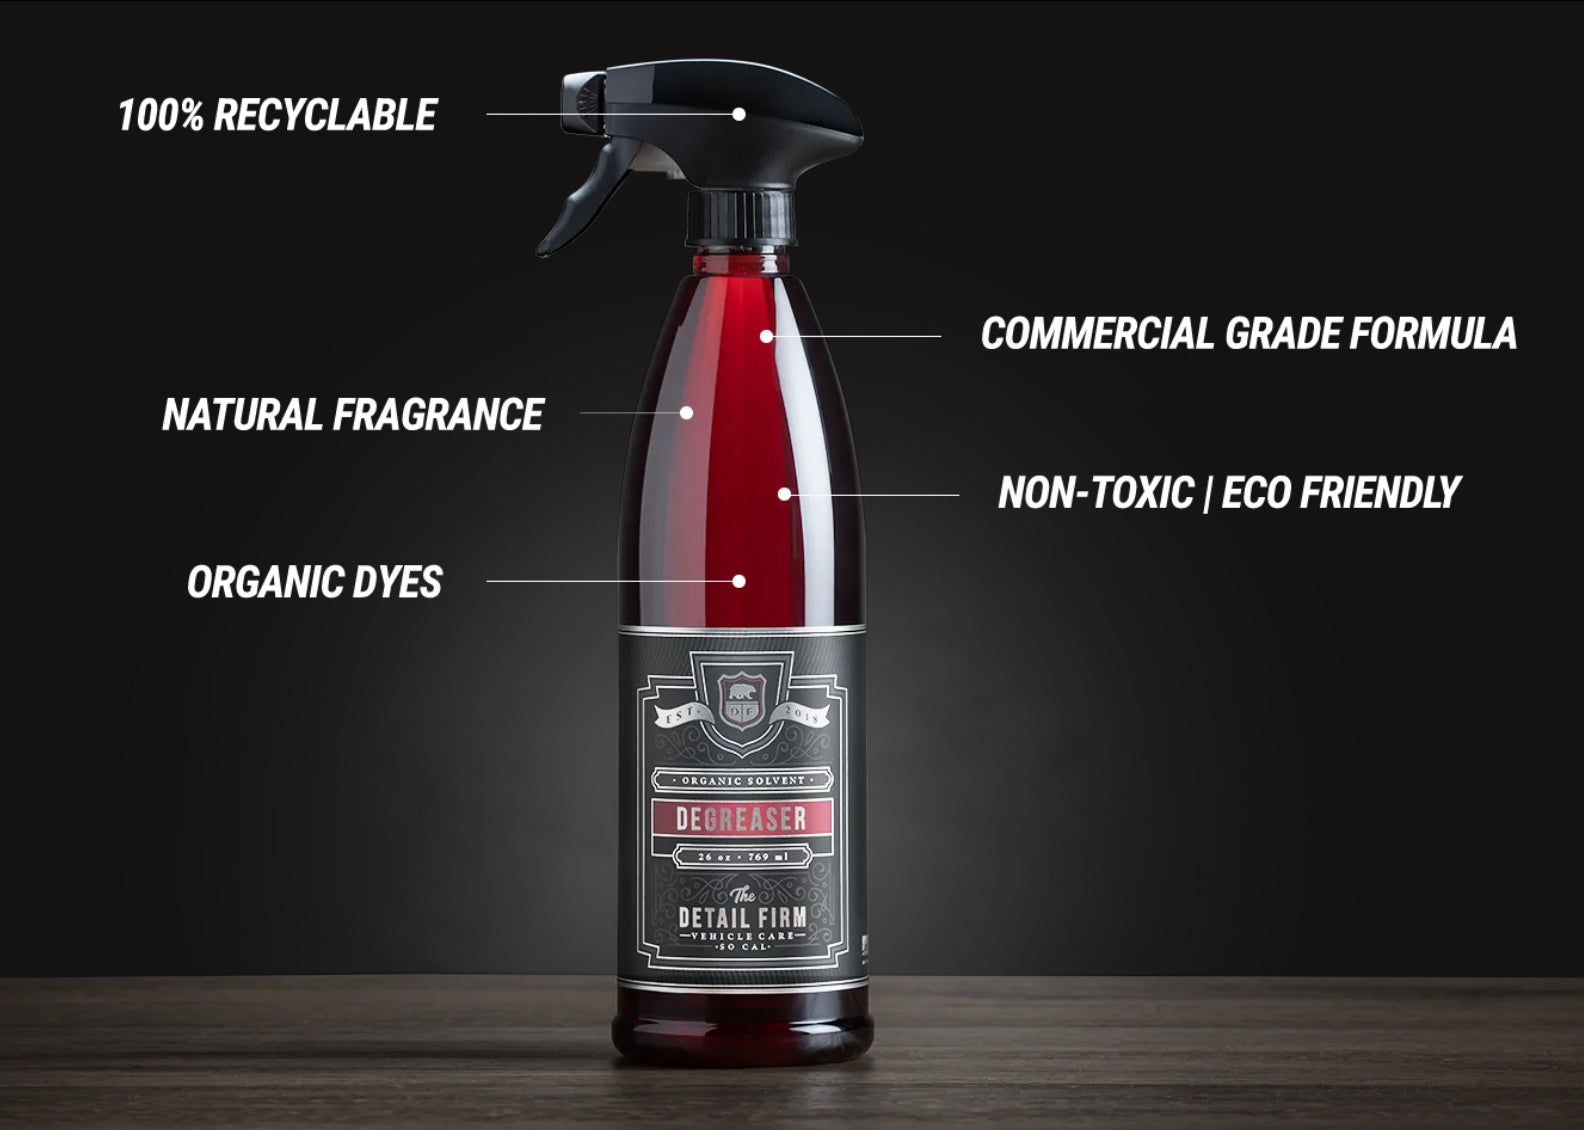 The Detail Firm Degreaser